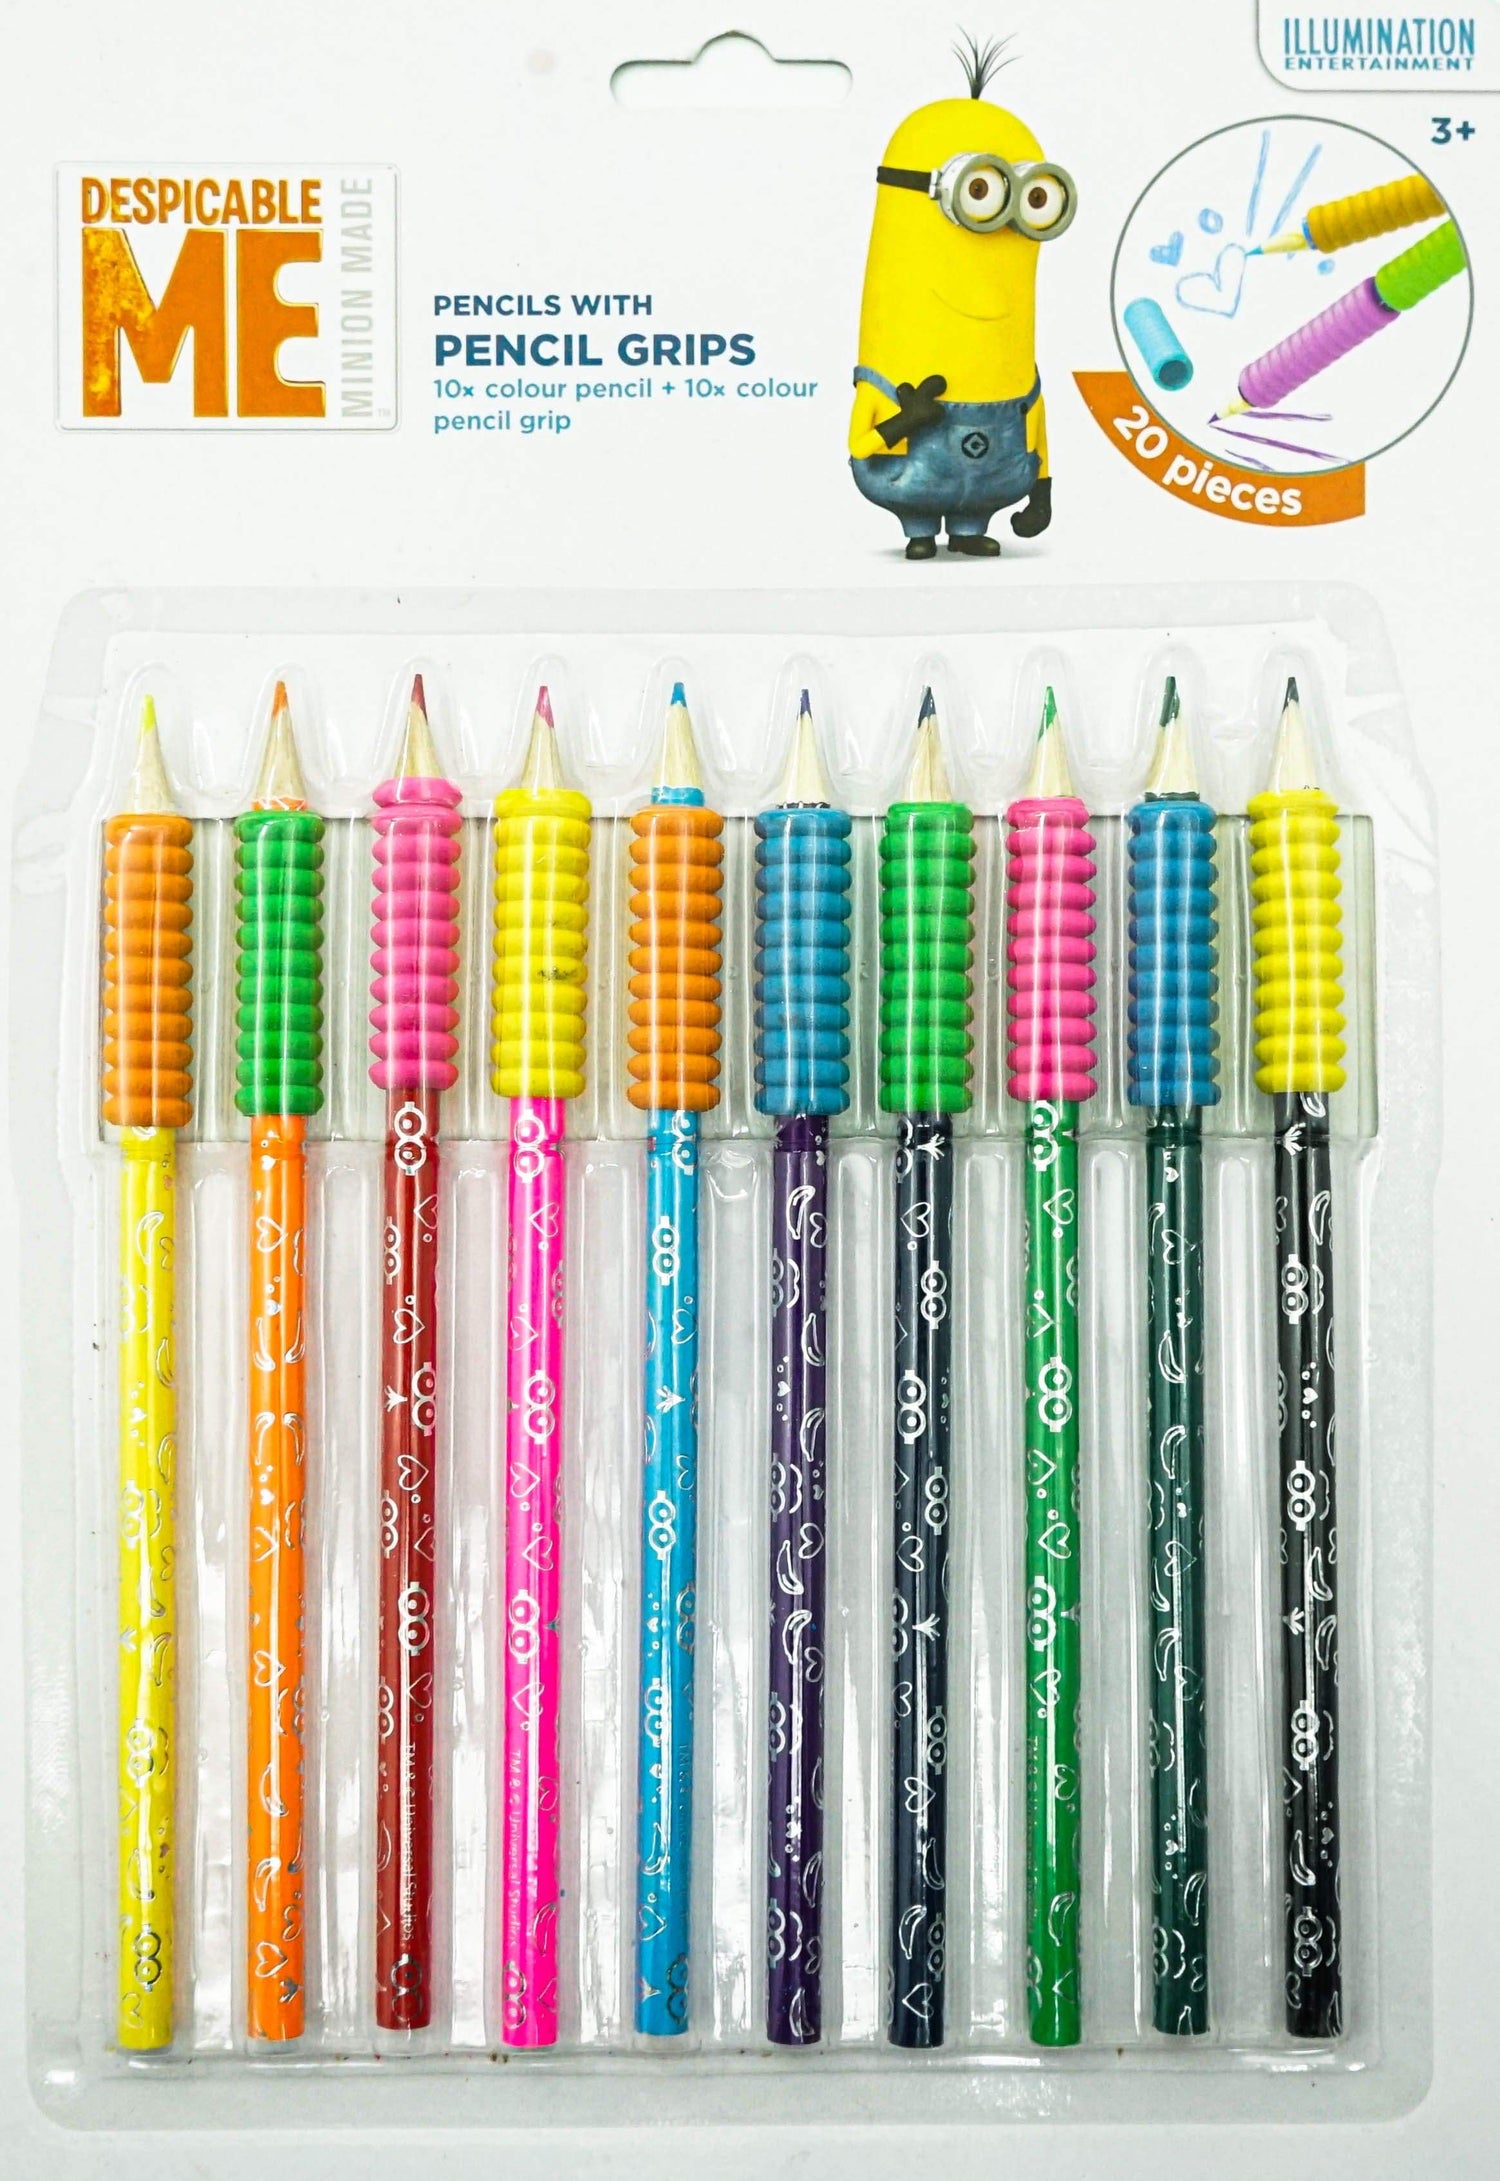 Despicable Me Minnion Made: Colour Pencils With Pencil Grips